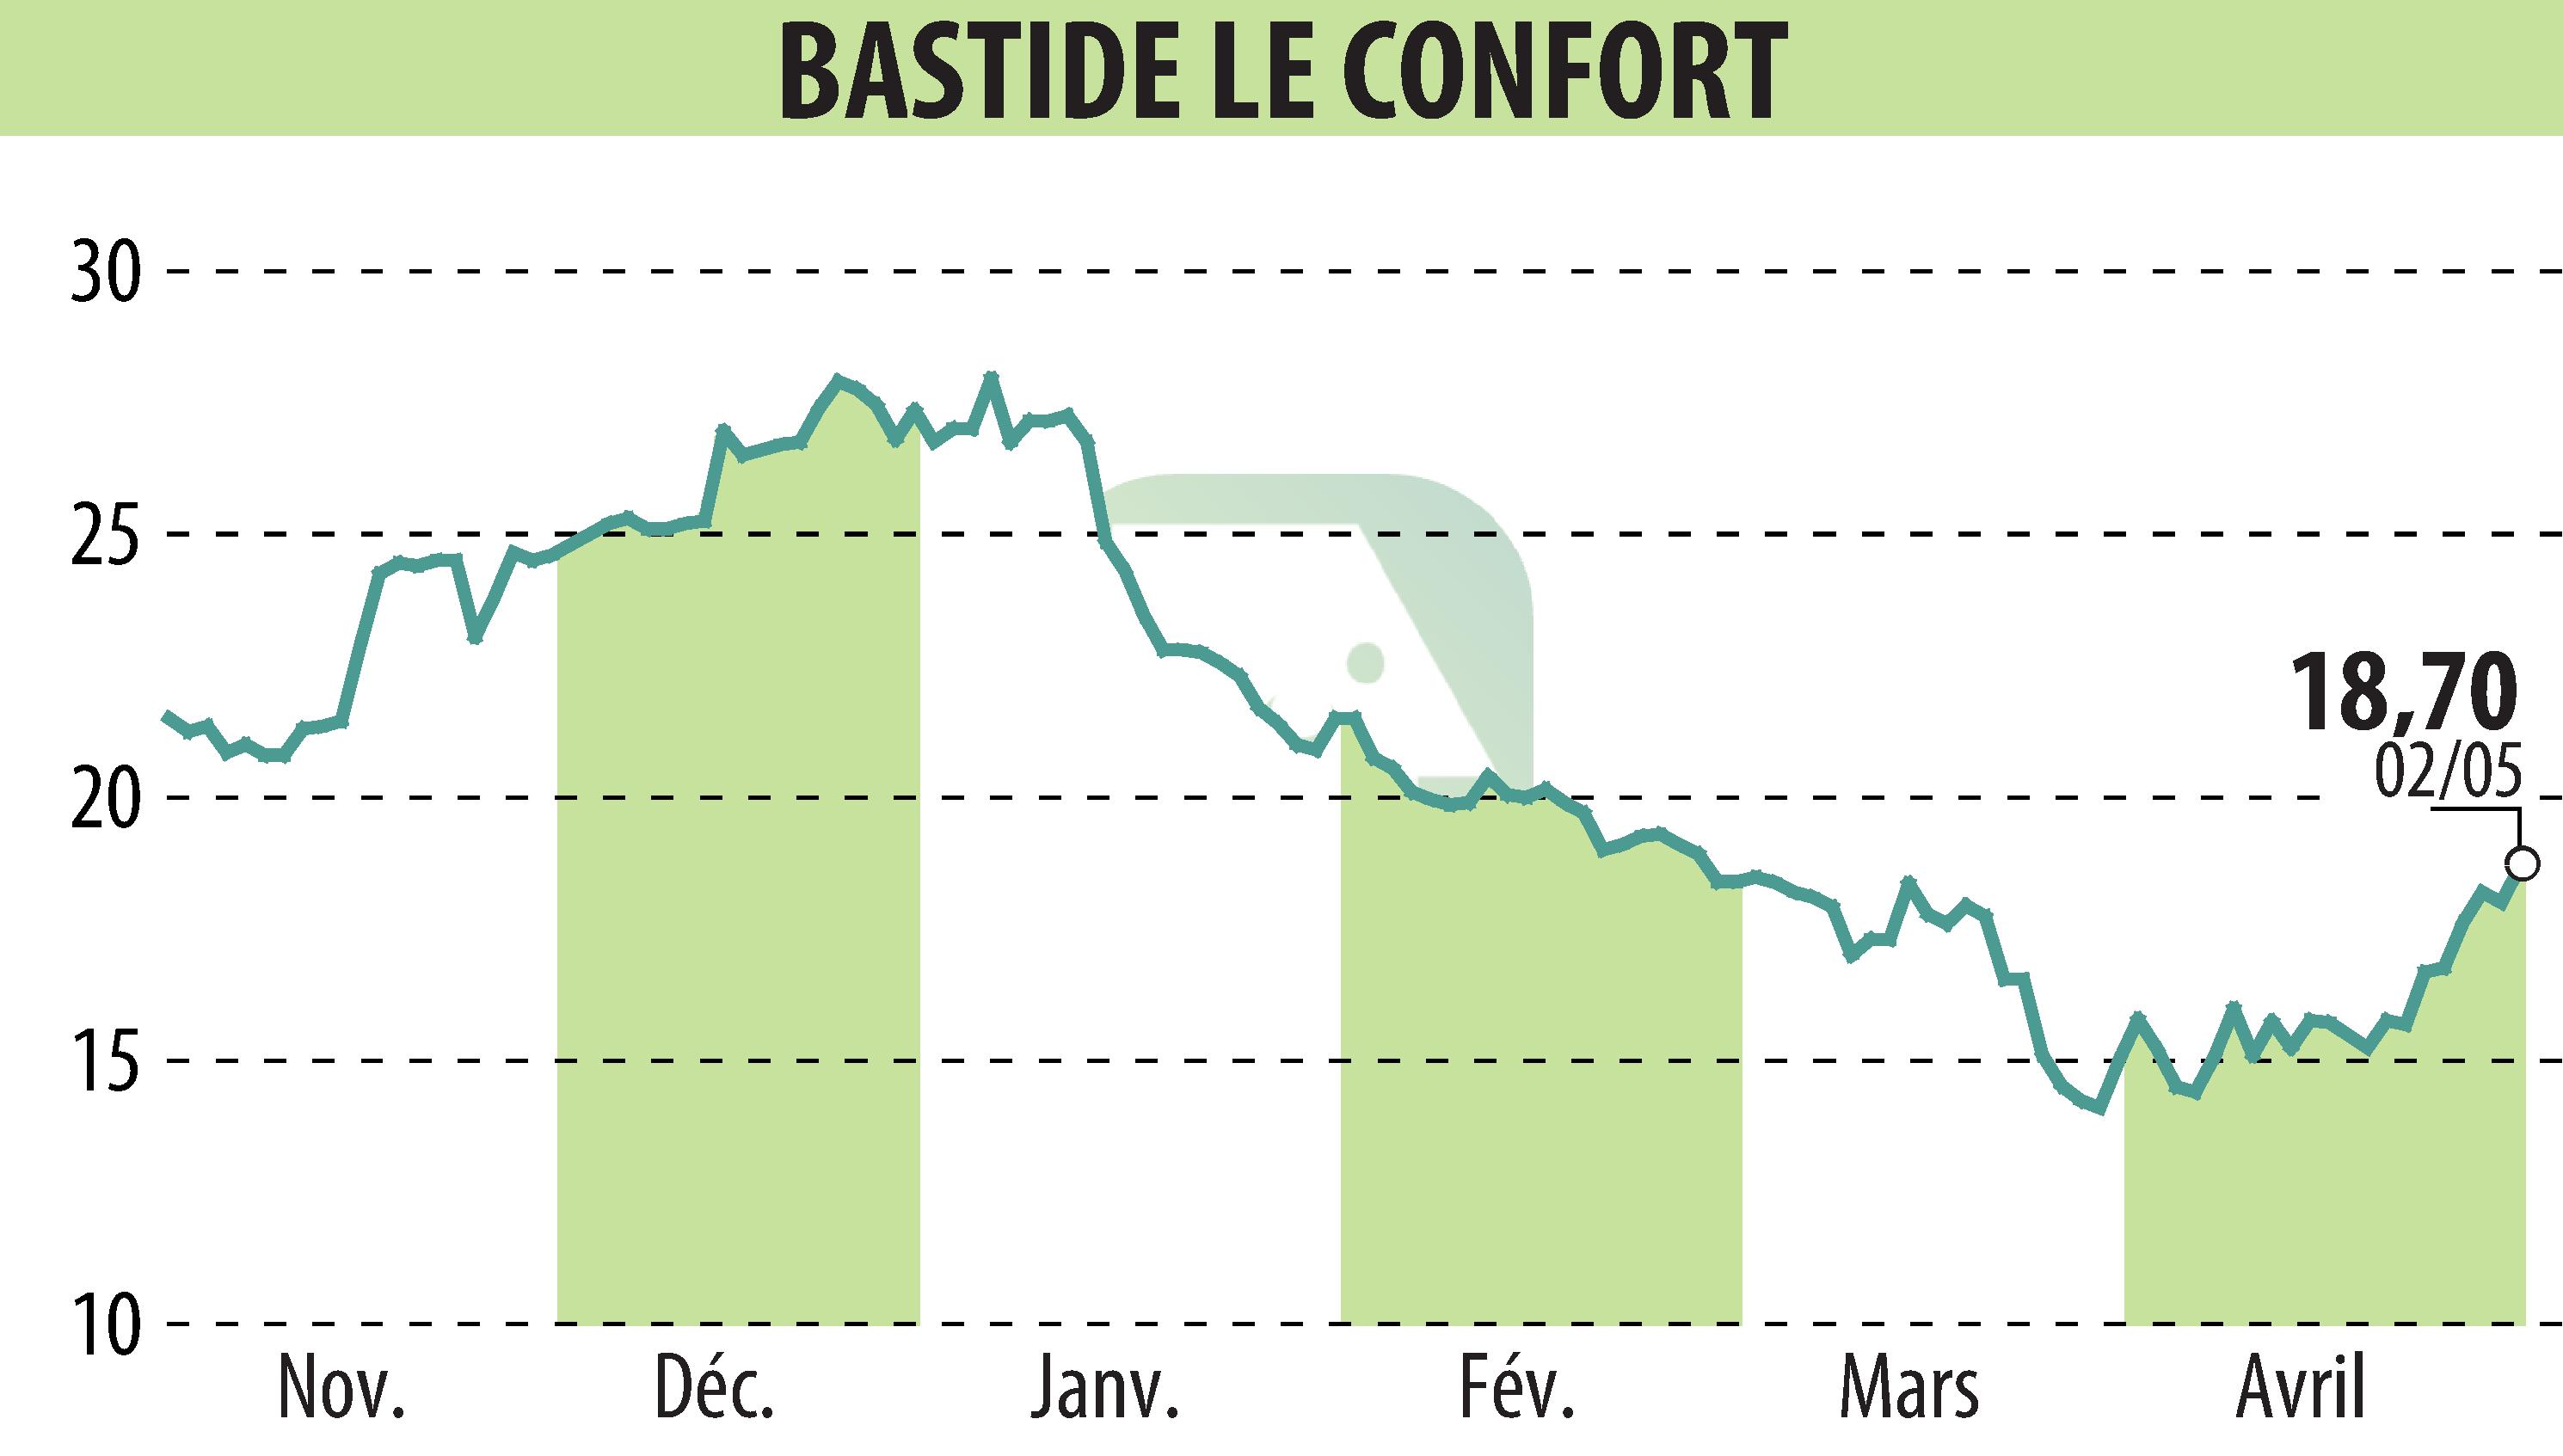 Stock price chart of BASTIDE (EPA:BLC) showing fluctuations.